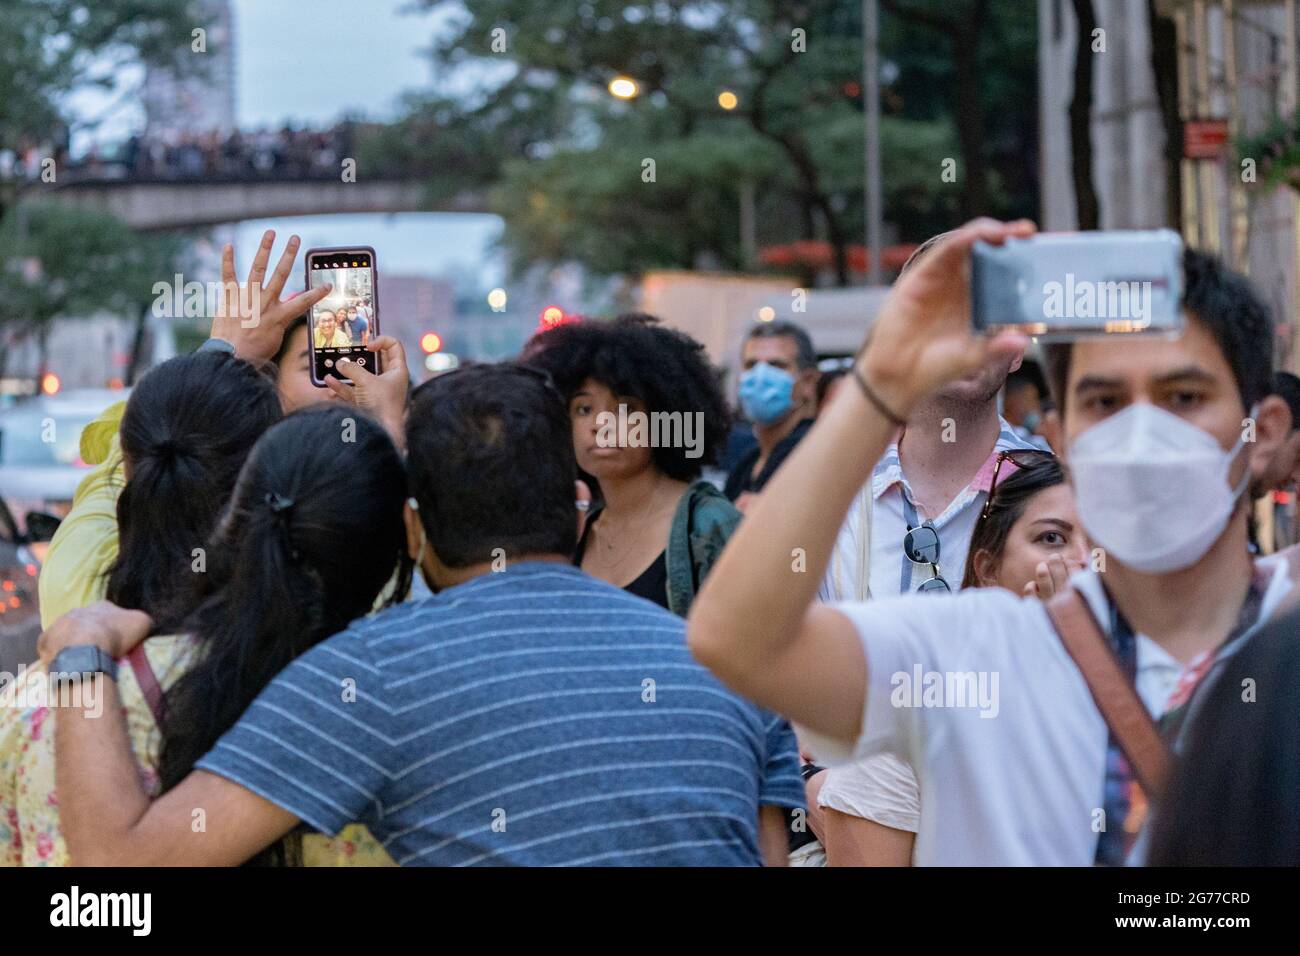 Viewers gather to watch and photograph in Manhattan during the